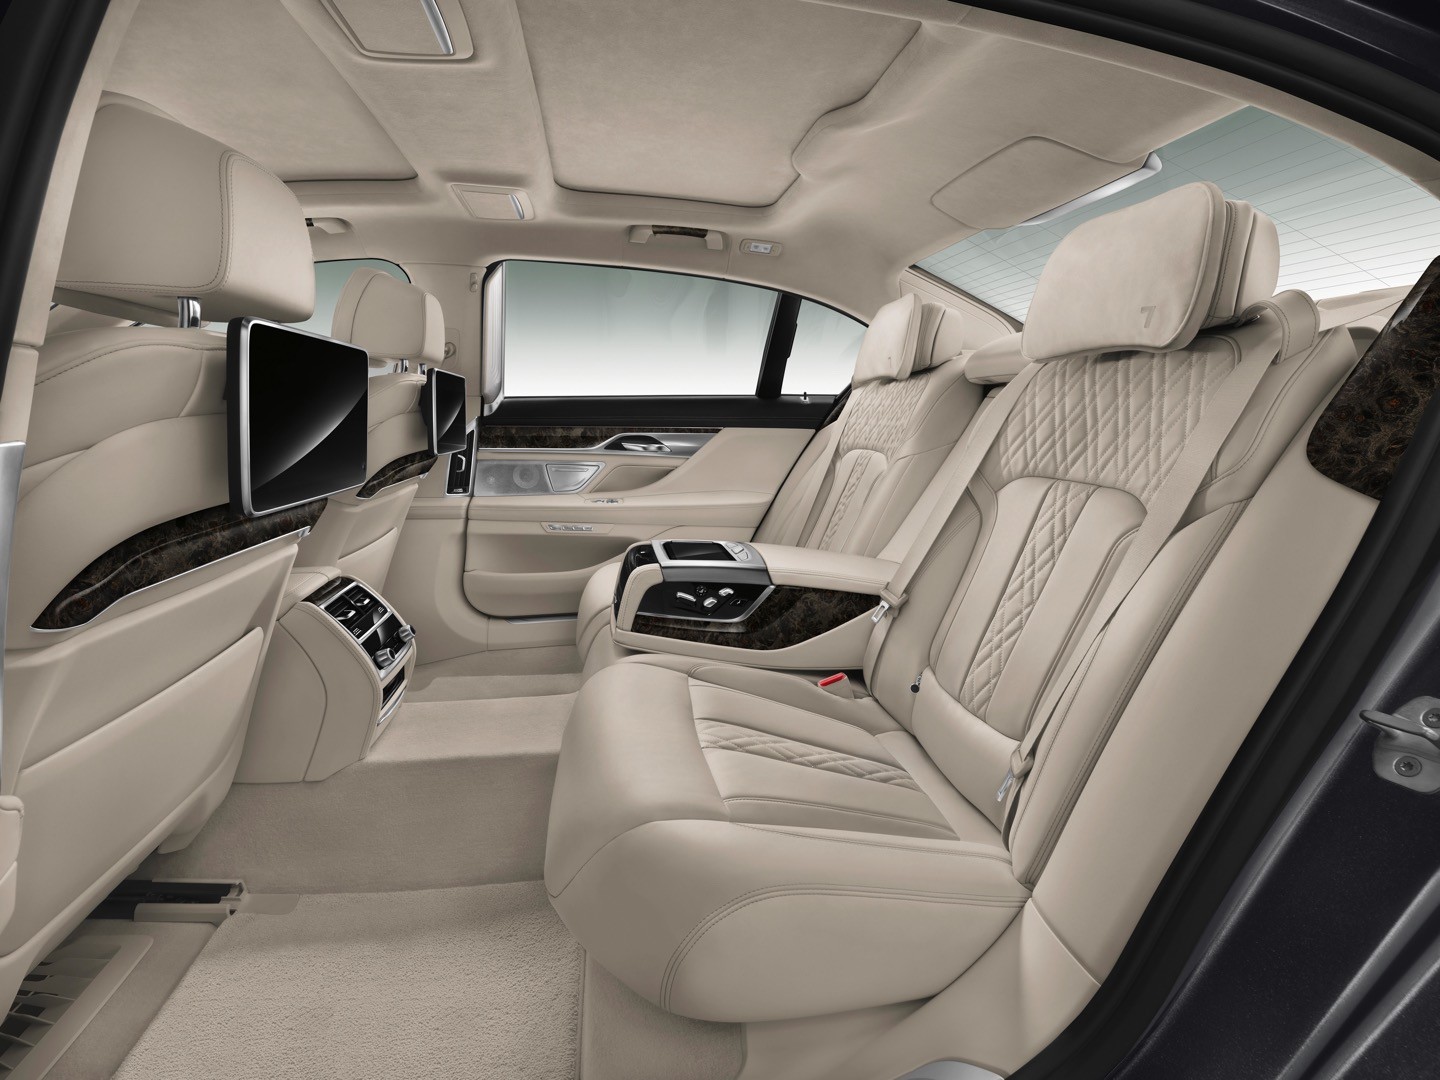 2016-bmw-7-series-finally-officially-unveiled-the-good-stuffs-inside-photo-gallery_112